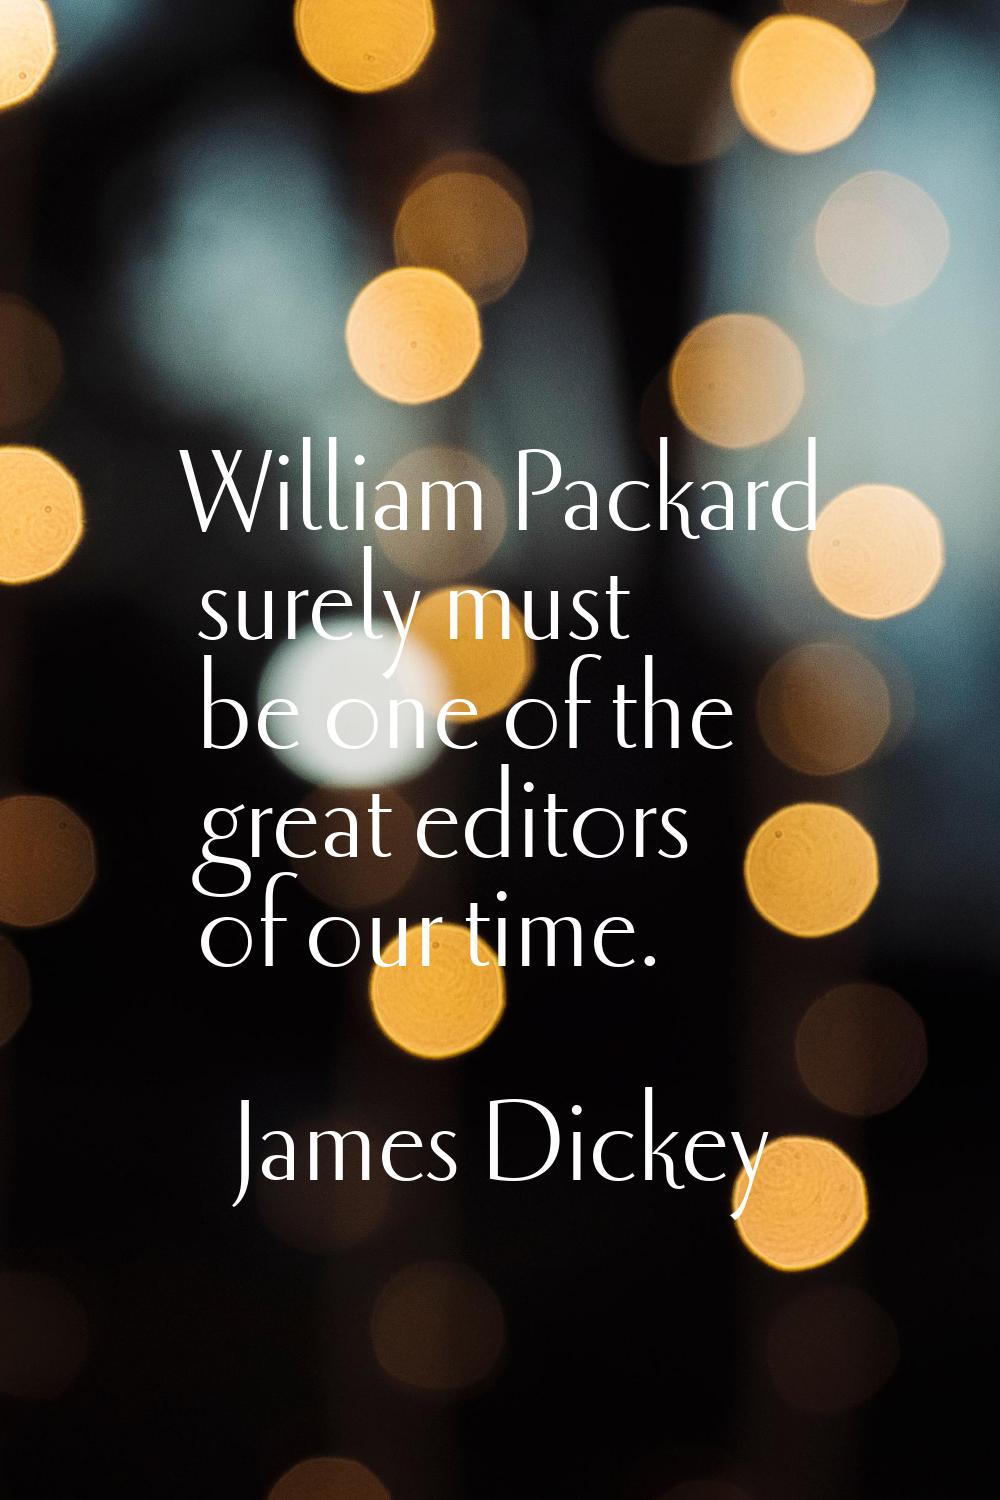 William Packard surely must be one of the great editors of our time.